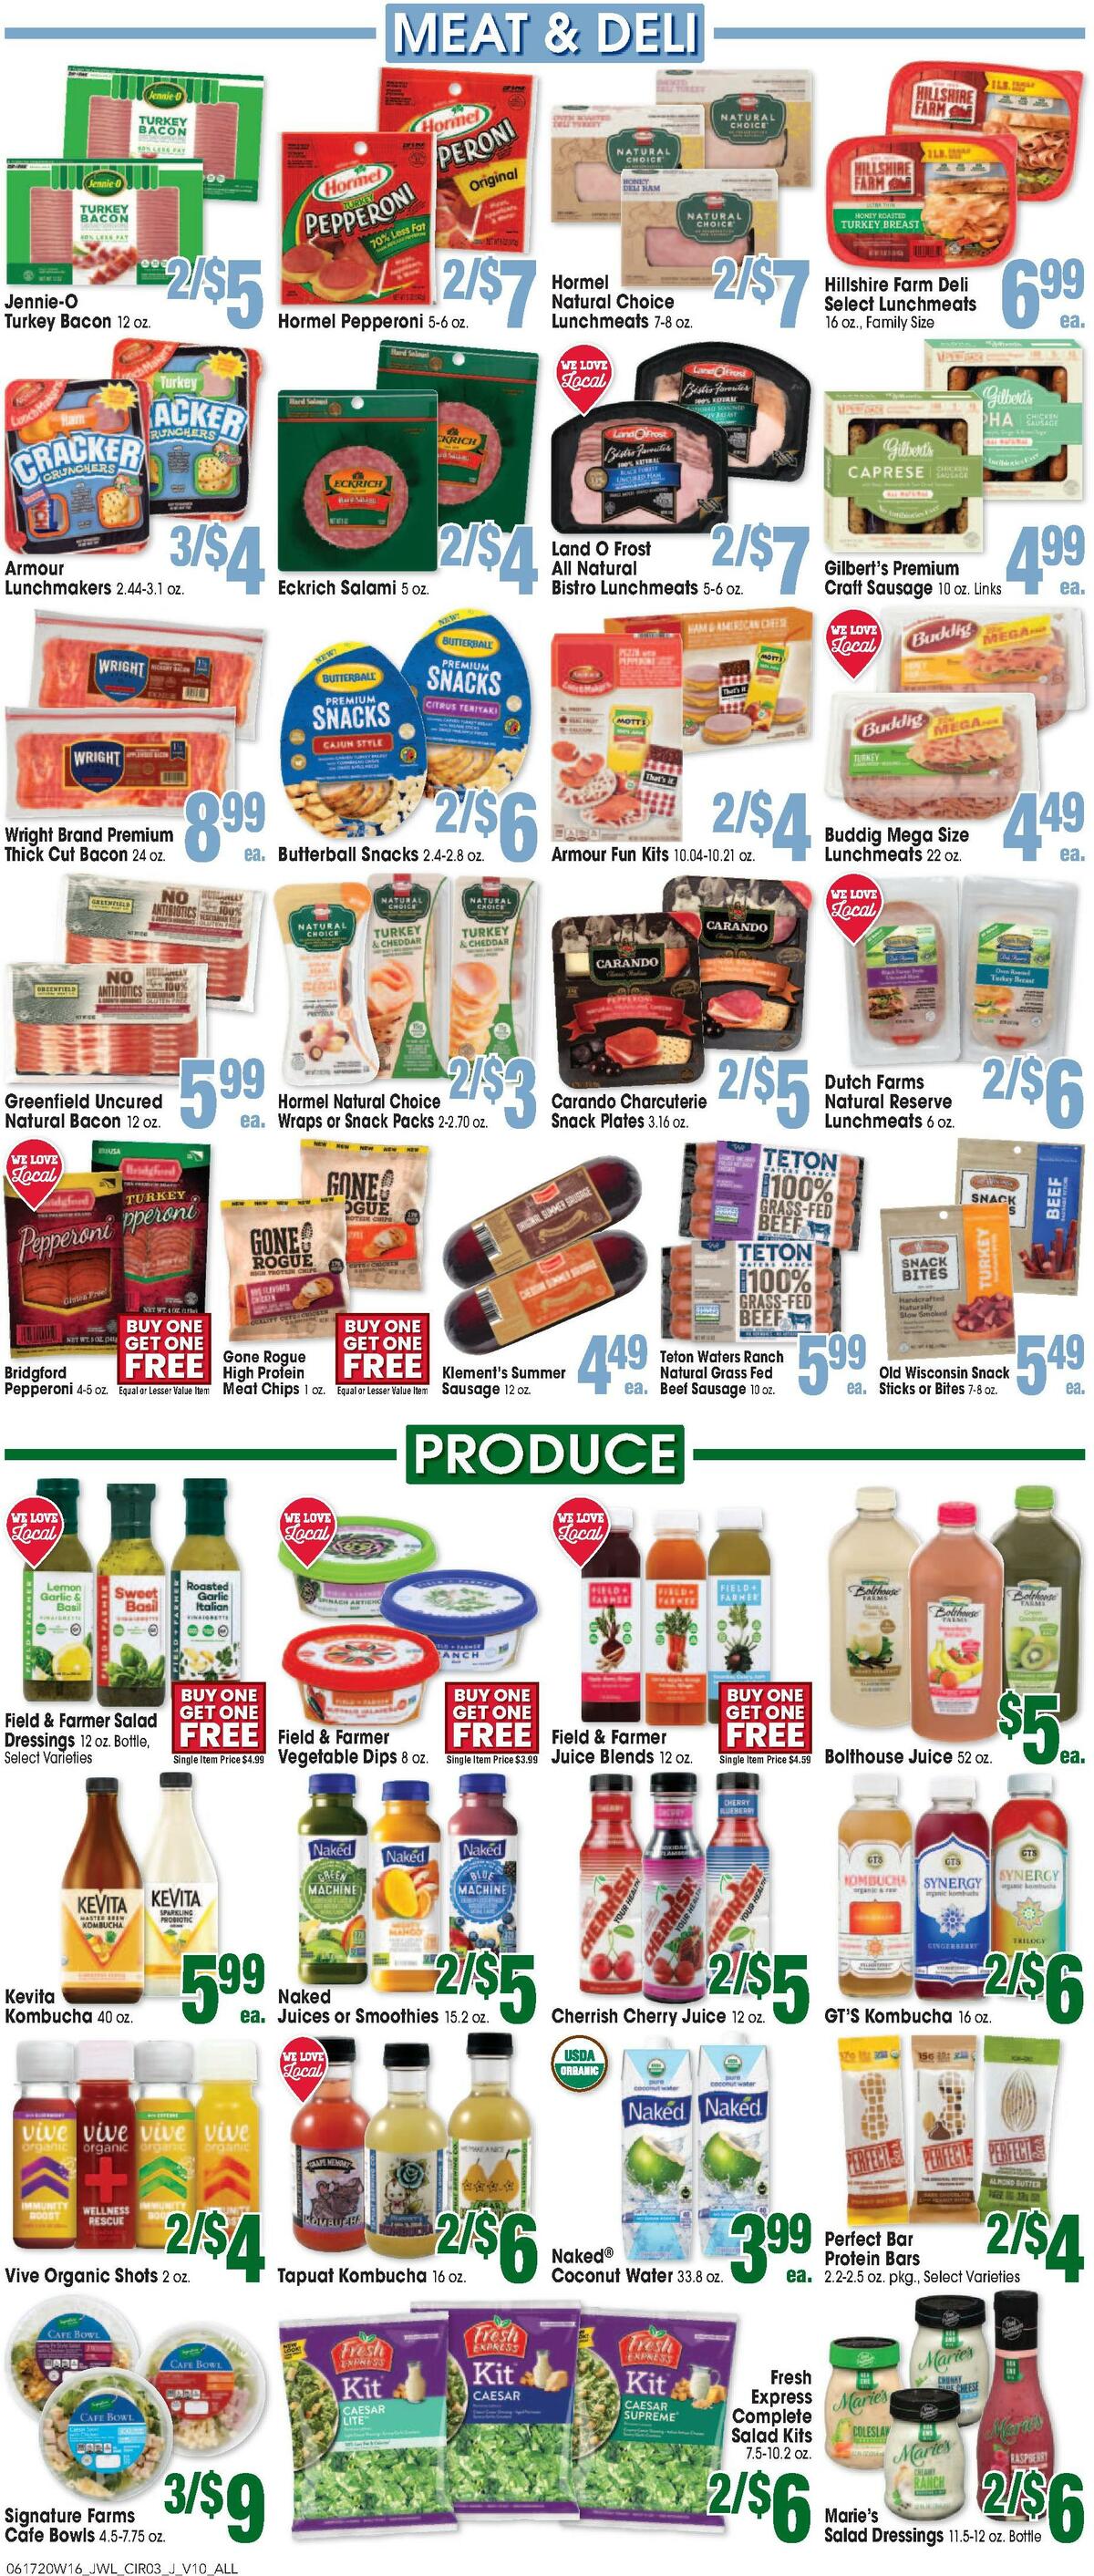 Jewel Osco Weekly Ad from June 17